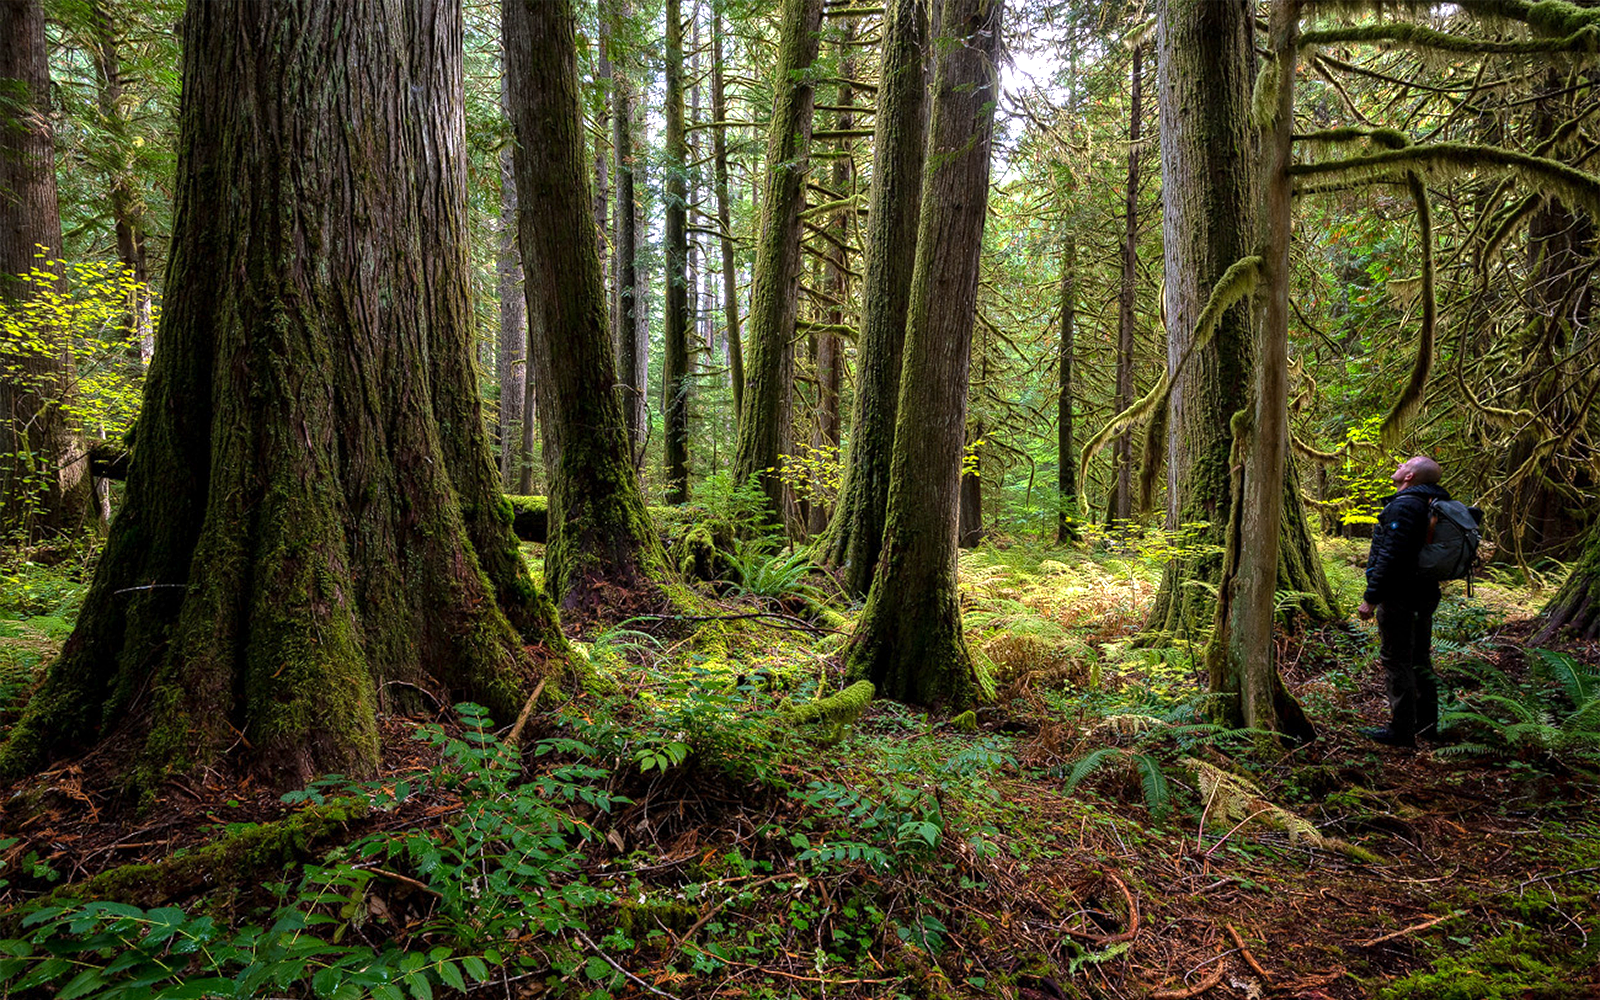 Opinion: Biden’s old-growth forest executive order has giant hole